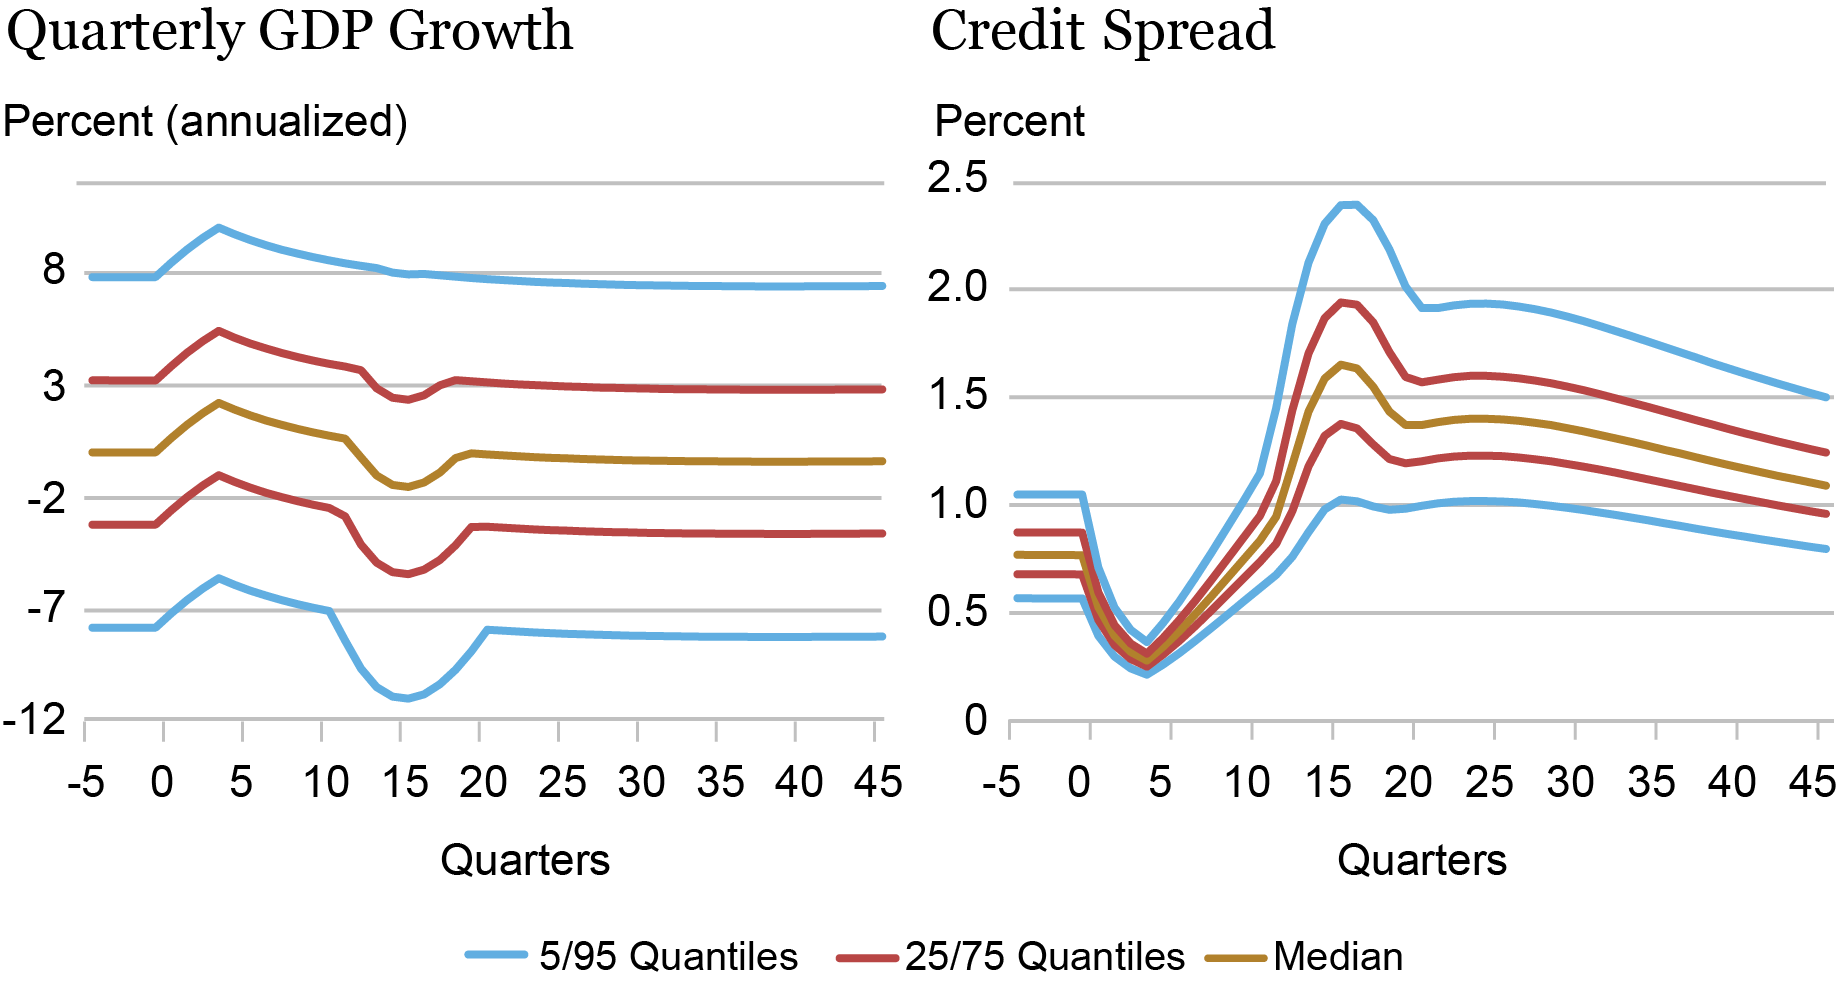 A two-panel Liberty Street Economics chart showing the impact of persistently lower interest rates on the real economy. The chart shows the distribution of possible economic outcomes on GDP growth (left panel) and credit spreads (right panel) as the economy evolves following the persistent decline in interest rates. Specifically, the chart displays the evolution of the 5th, 25th, 50th, 75th, and 95th quantiles. 